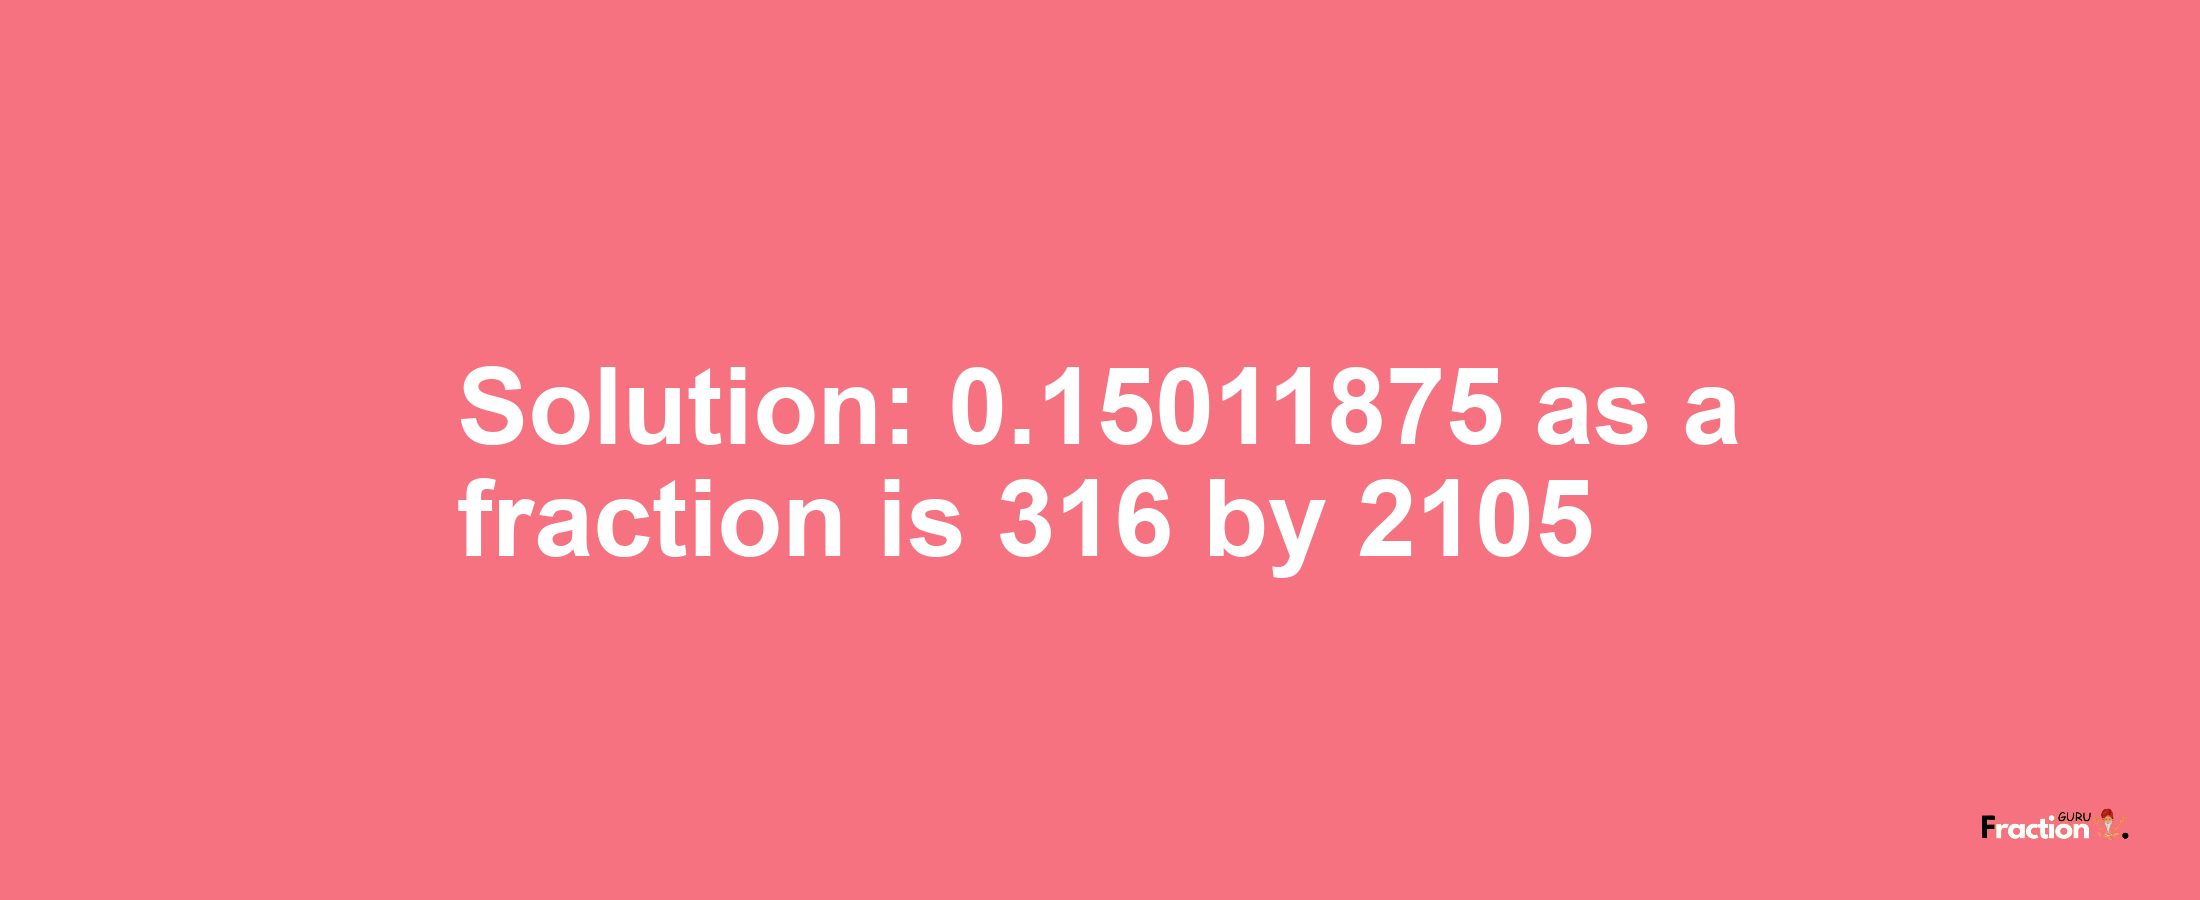 Solution:0.15011875 as a fraction is 316/2105